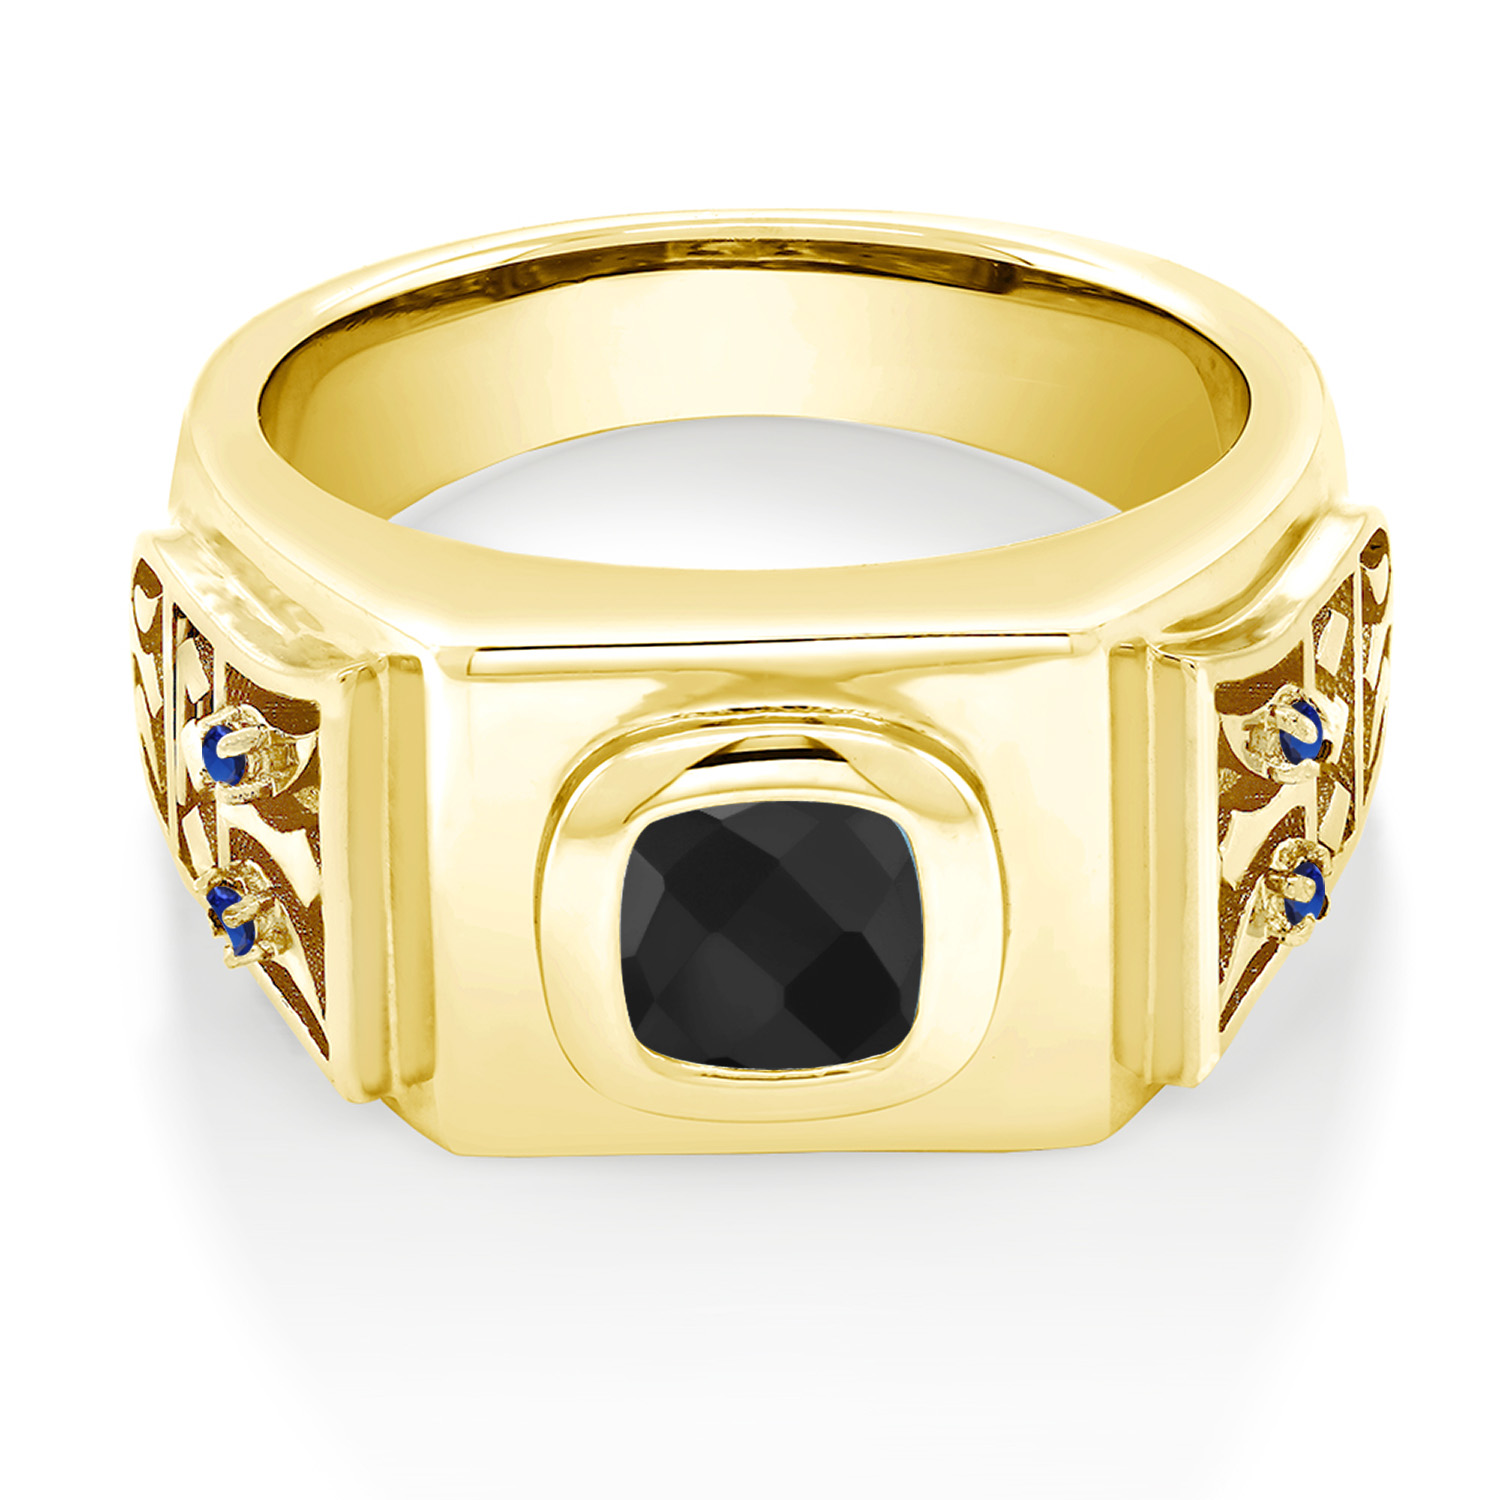 Gem Stone King 2.15 Ct Cushion Checkerboard Black Onyx Blue Created Sapphire 18K Yellow Gold Plated Silver Men's Ring